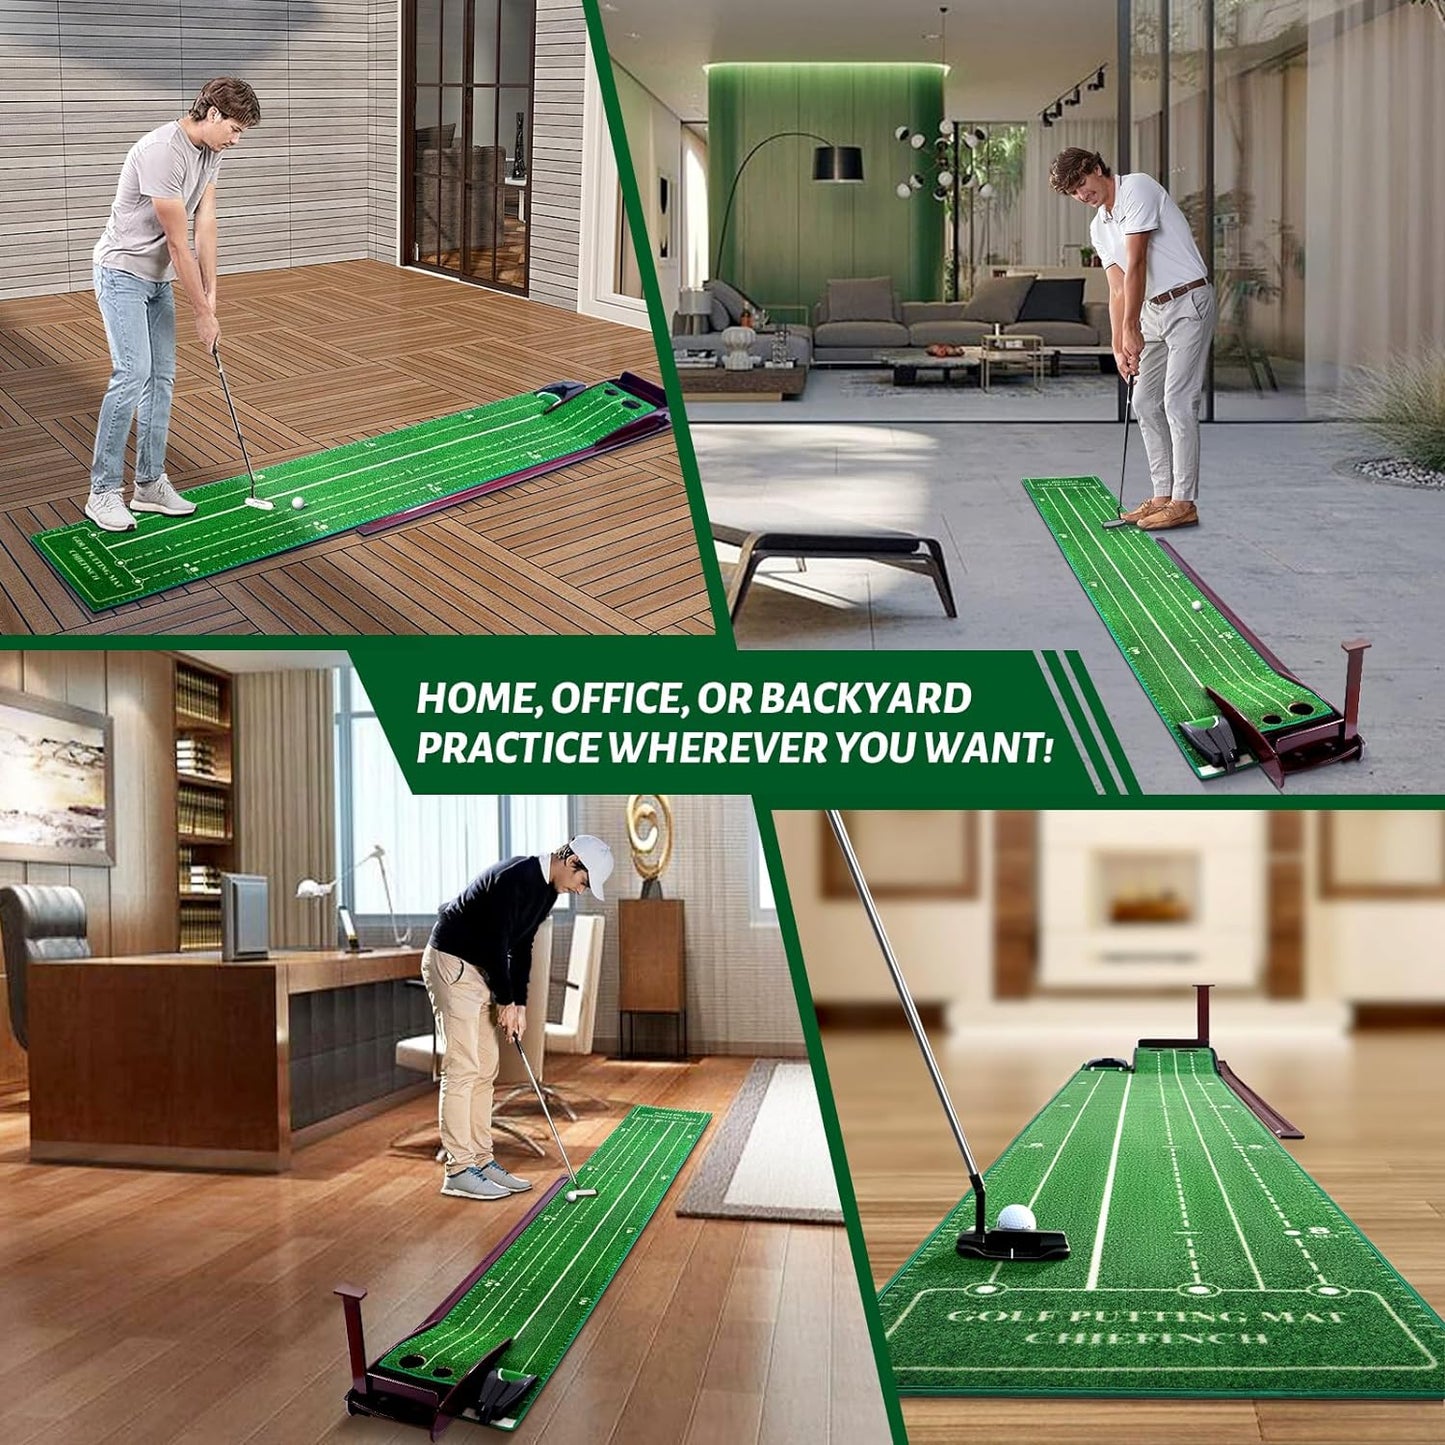 Golf Putting Mat for Indoors - Putting Green with 3 Tracks & Automatic Ball Return, Golf Training Equipment for Mini Game & Golf Pratice at Home or in Office, Gift for Golfer/Golf Lovers/Man